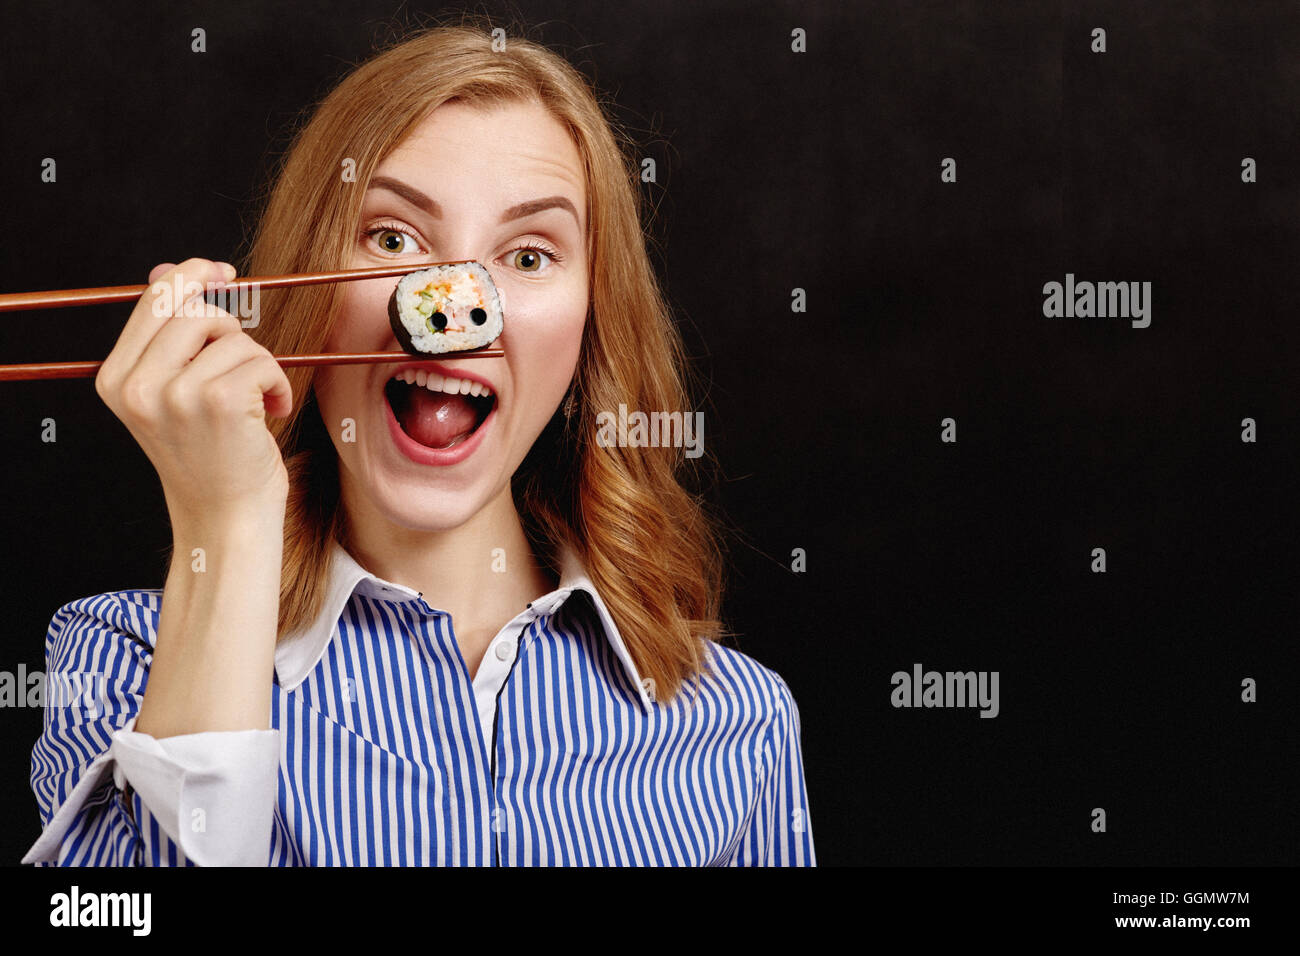 fun girl show snout with sushi roll on black background with copyspace Stock Photo